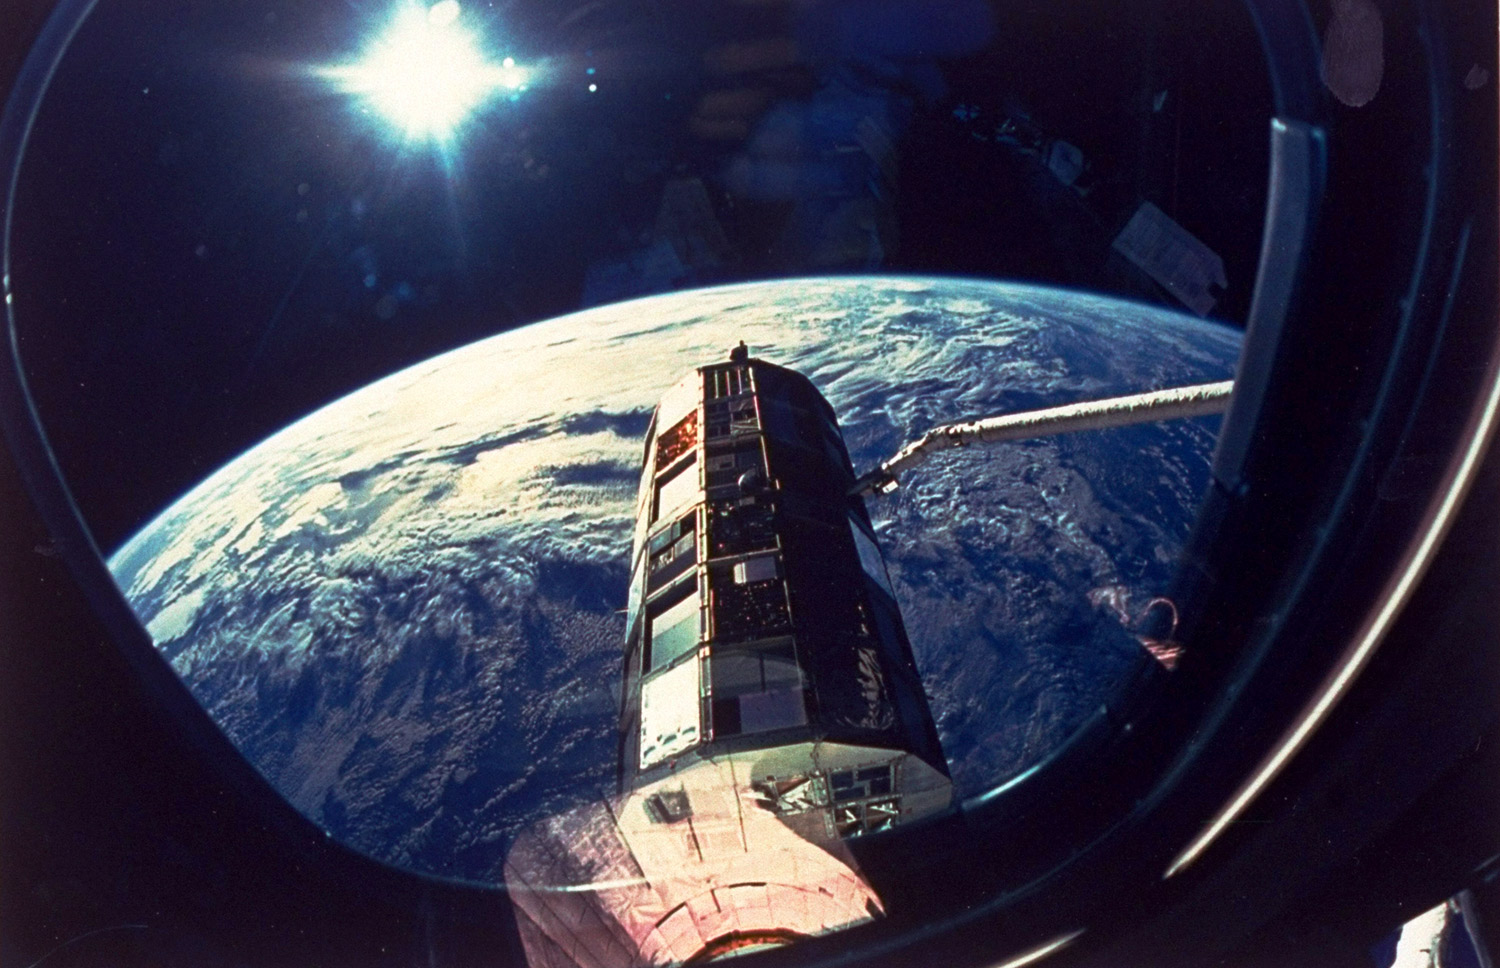 A view from the space shuttle Columbia's starboard flight deck of NASA's Long Duration Exposure Facility with Earth in the background, January 20, 1990.